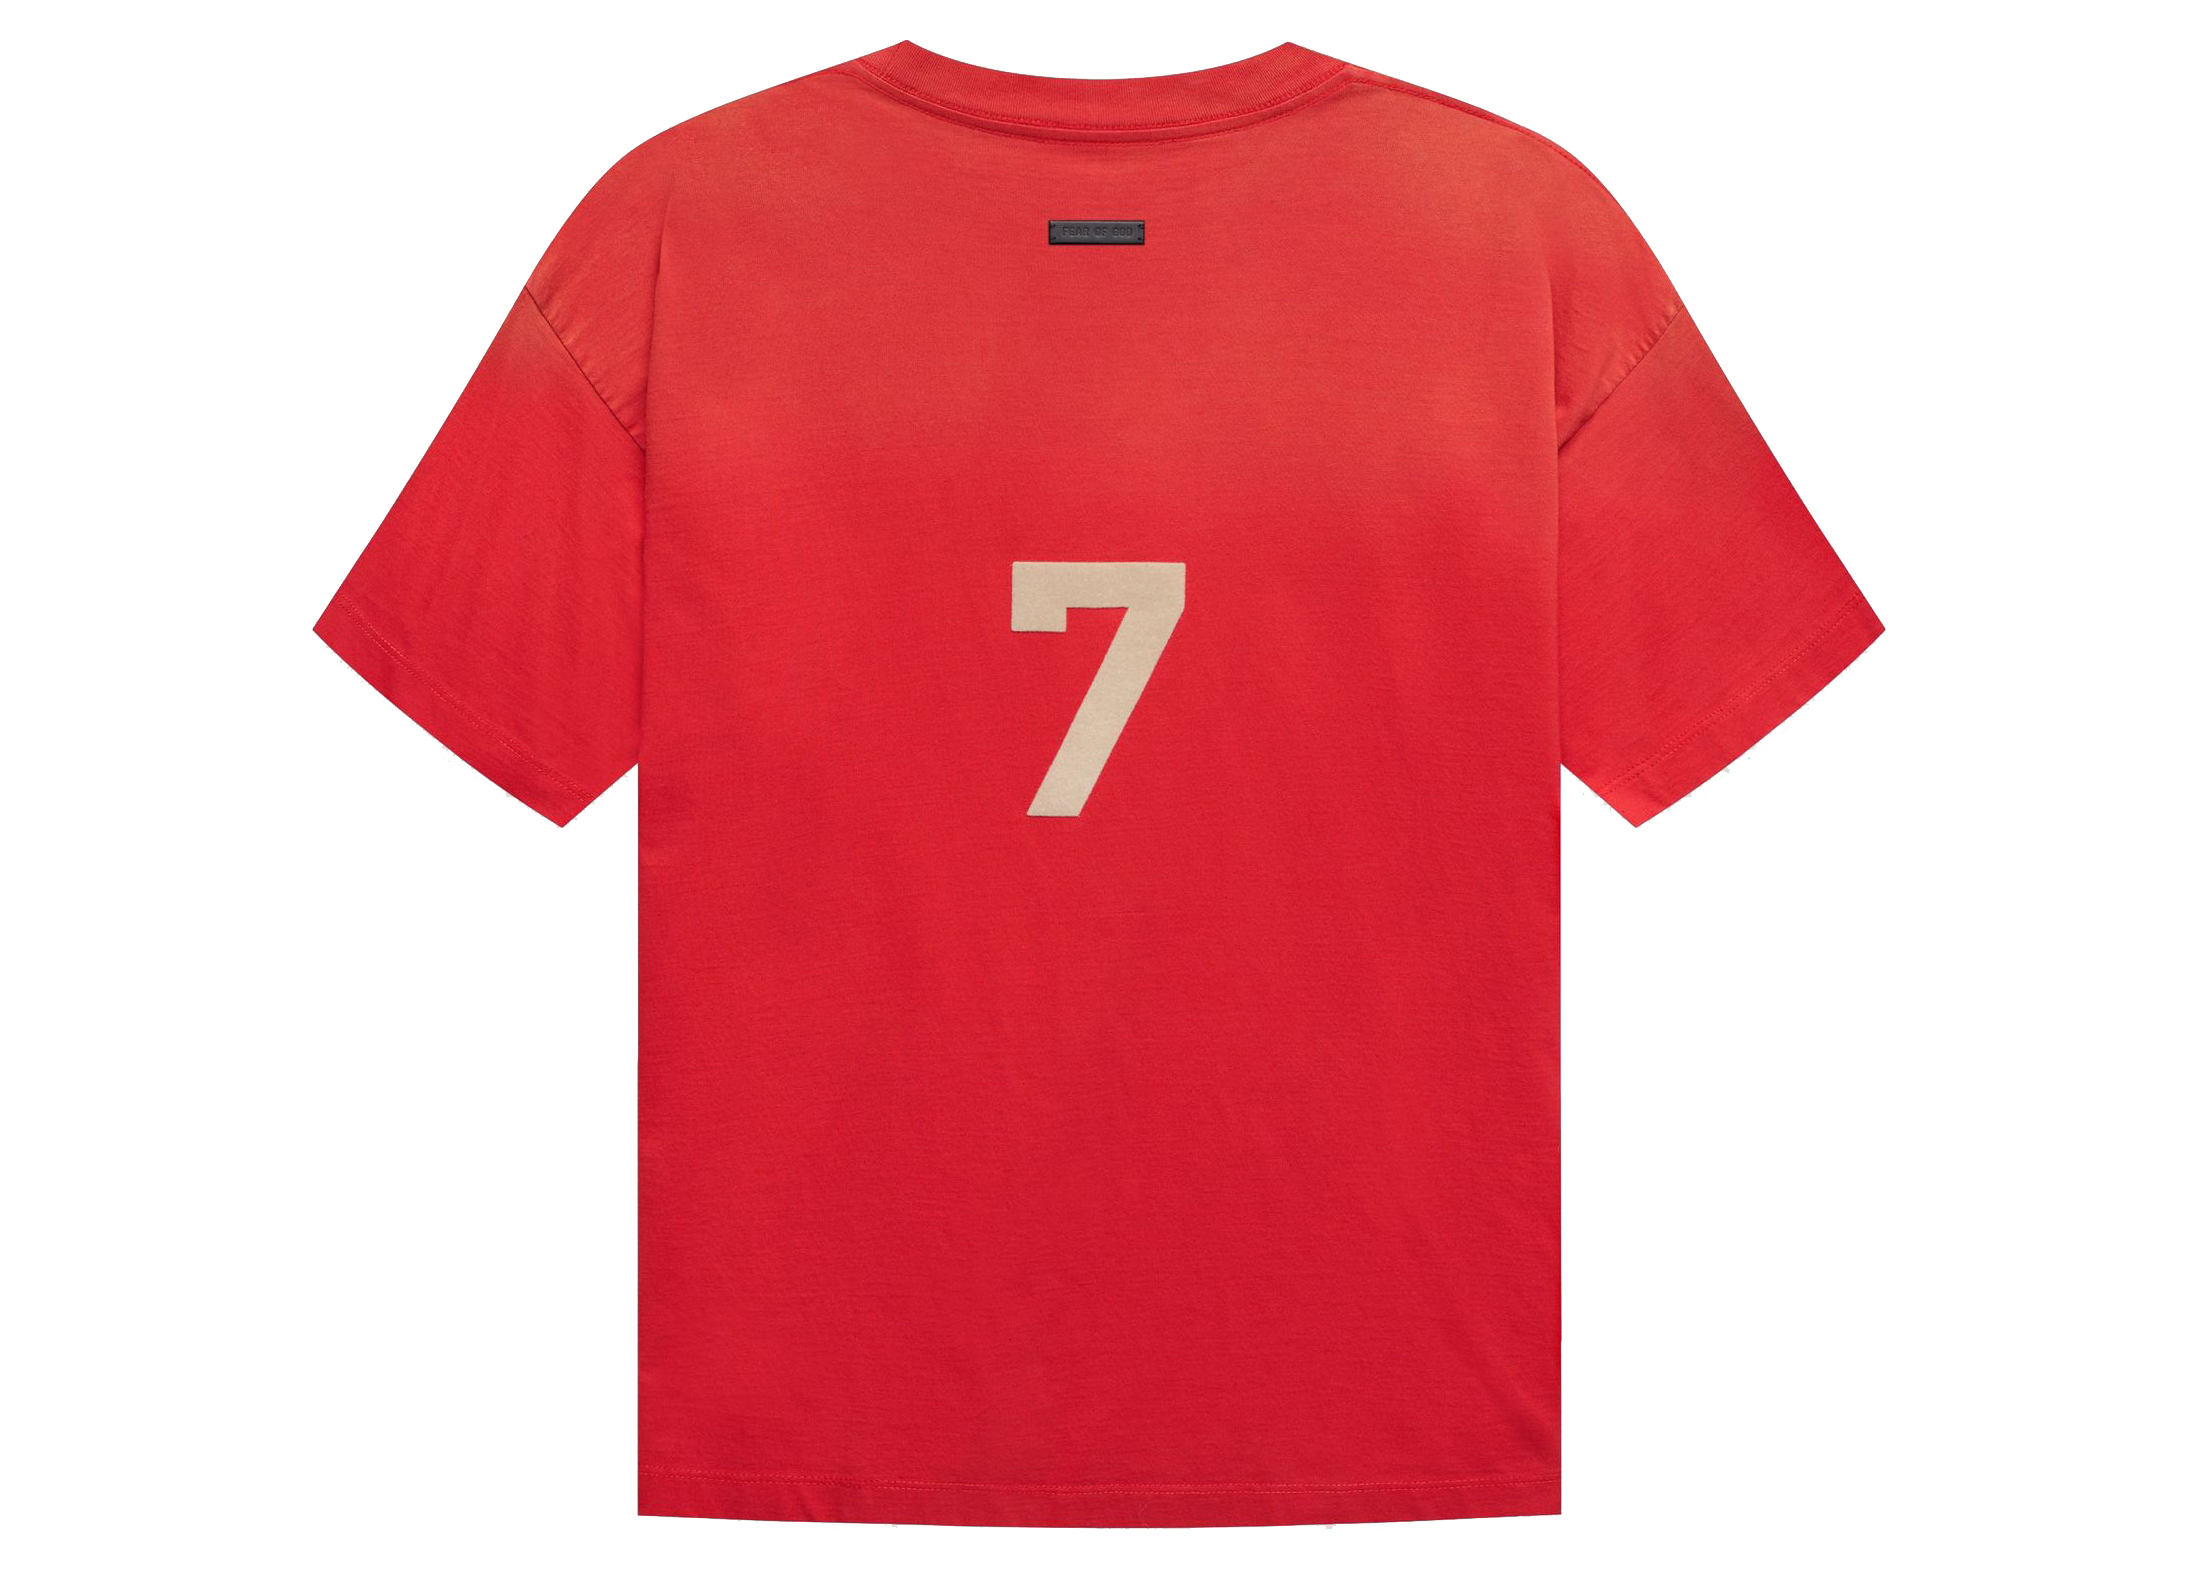 Fear of God Seventh Collection 7 Tee Vintage Red - SEVENTH 